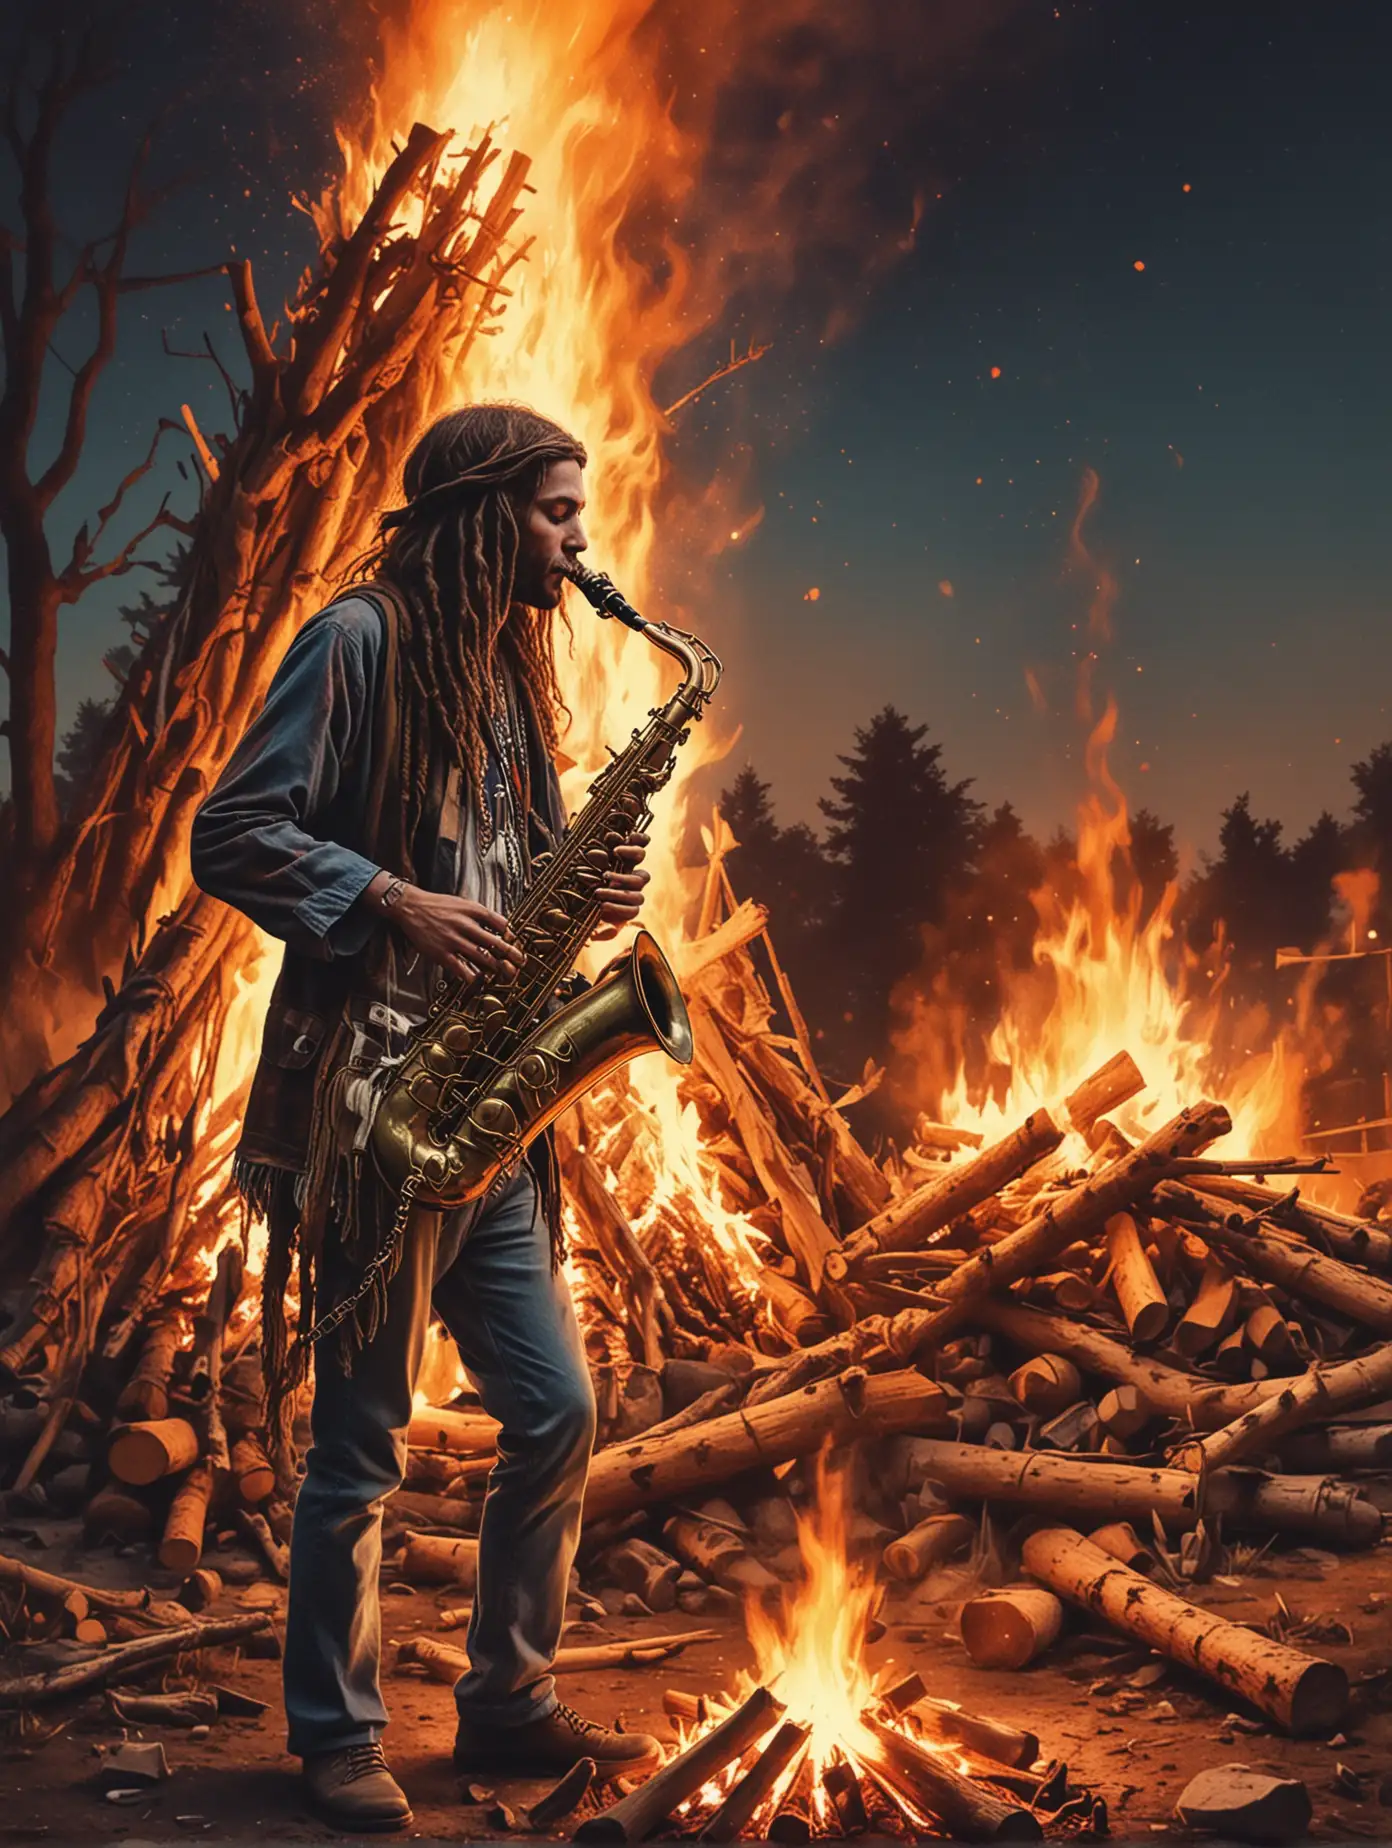 Hippie Playing Saxophone Next to Large Bonfire Illustrated Concert Poster Style